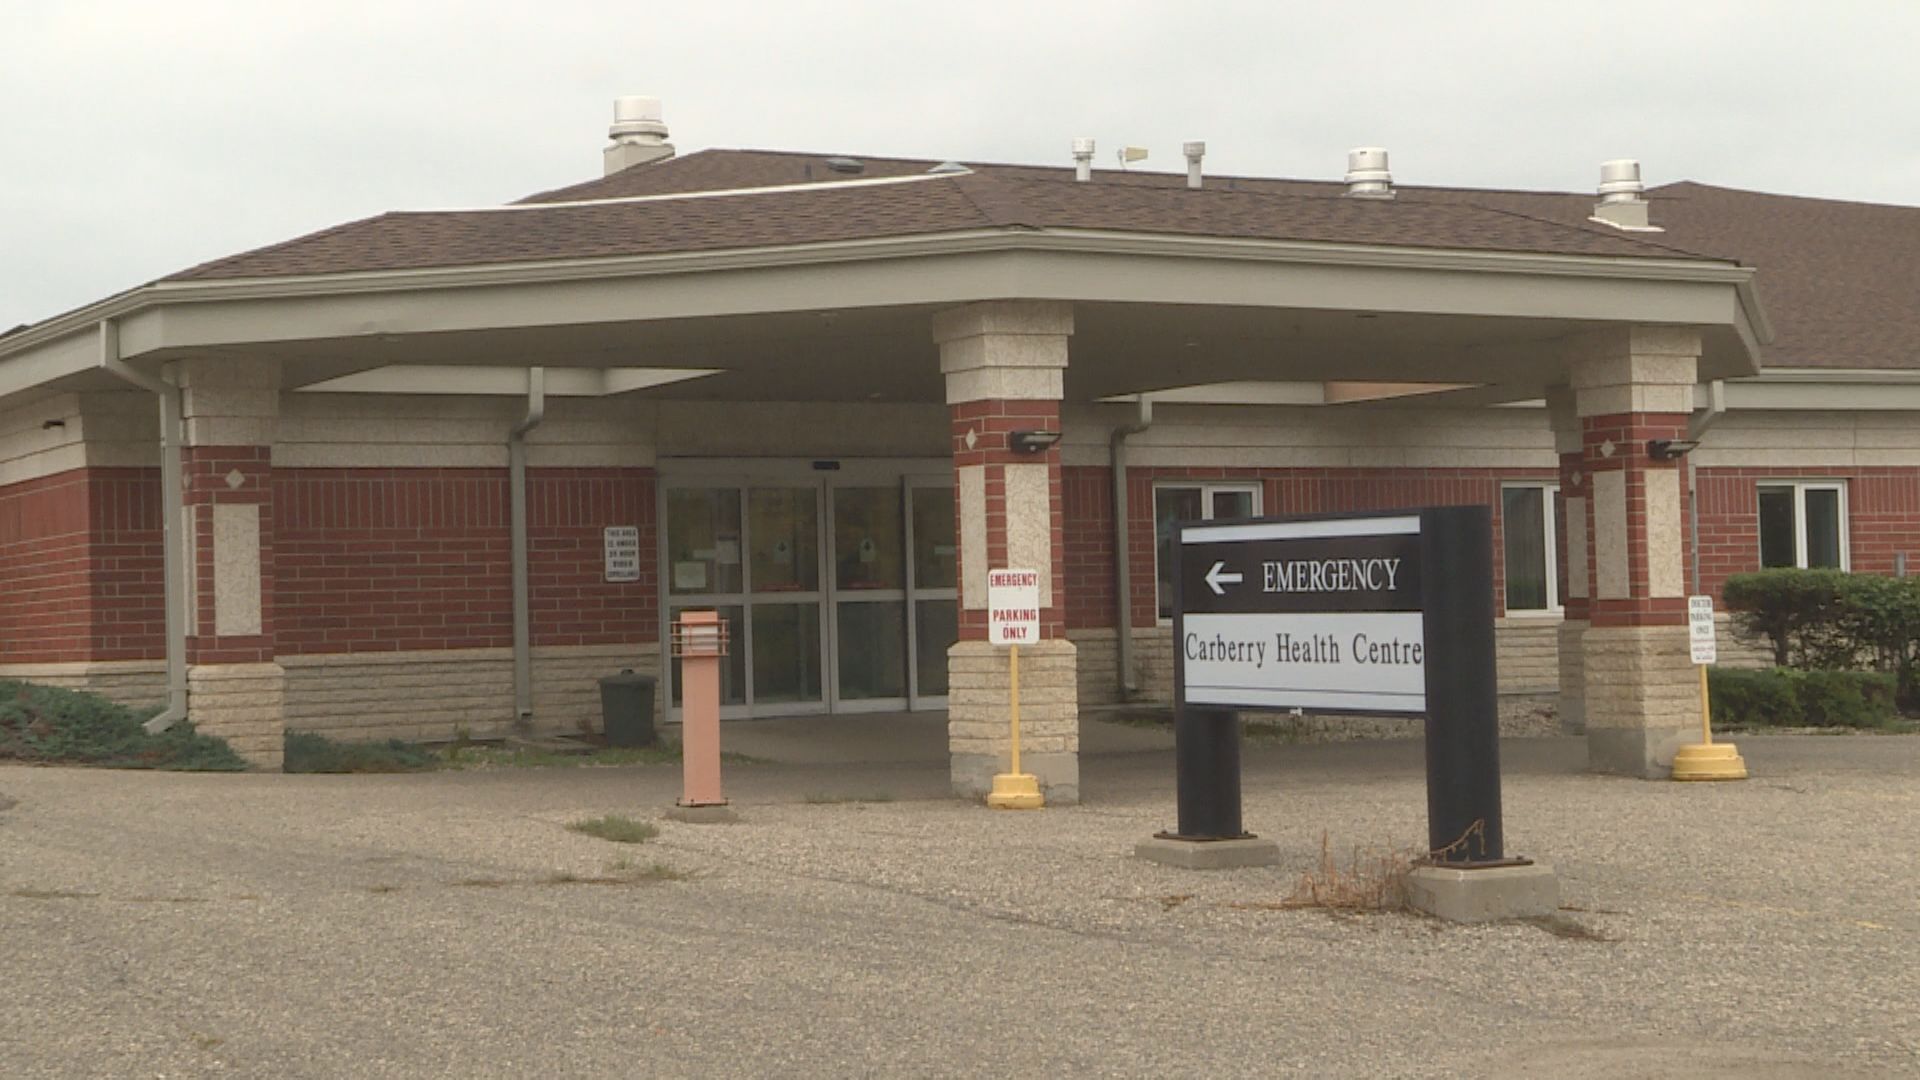 Manitoba community’s brush with ER closures highlights extent of health care concerns